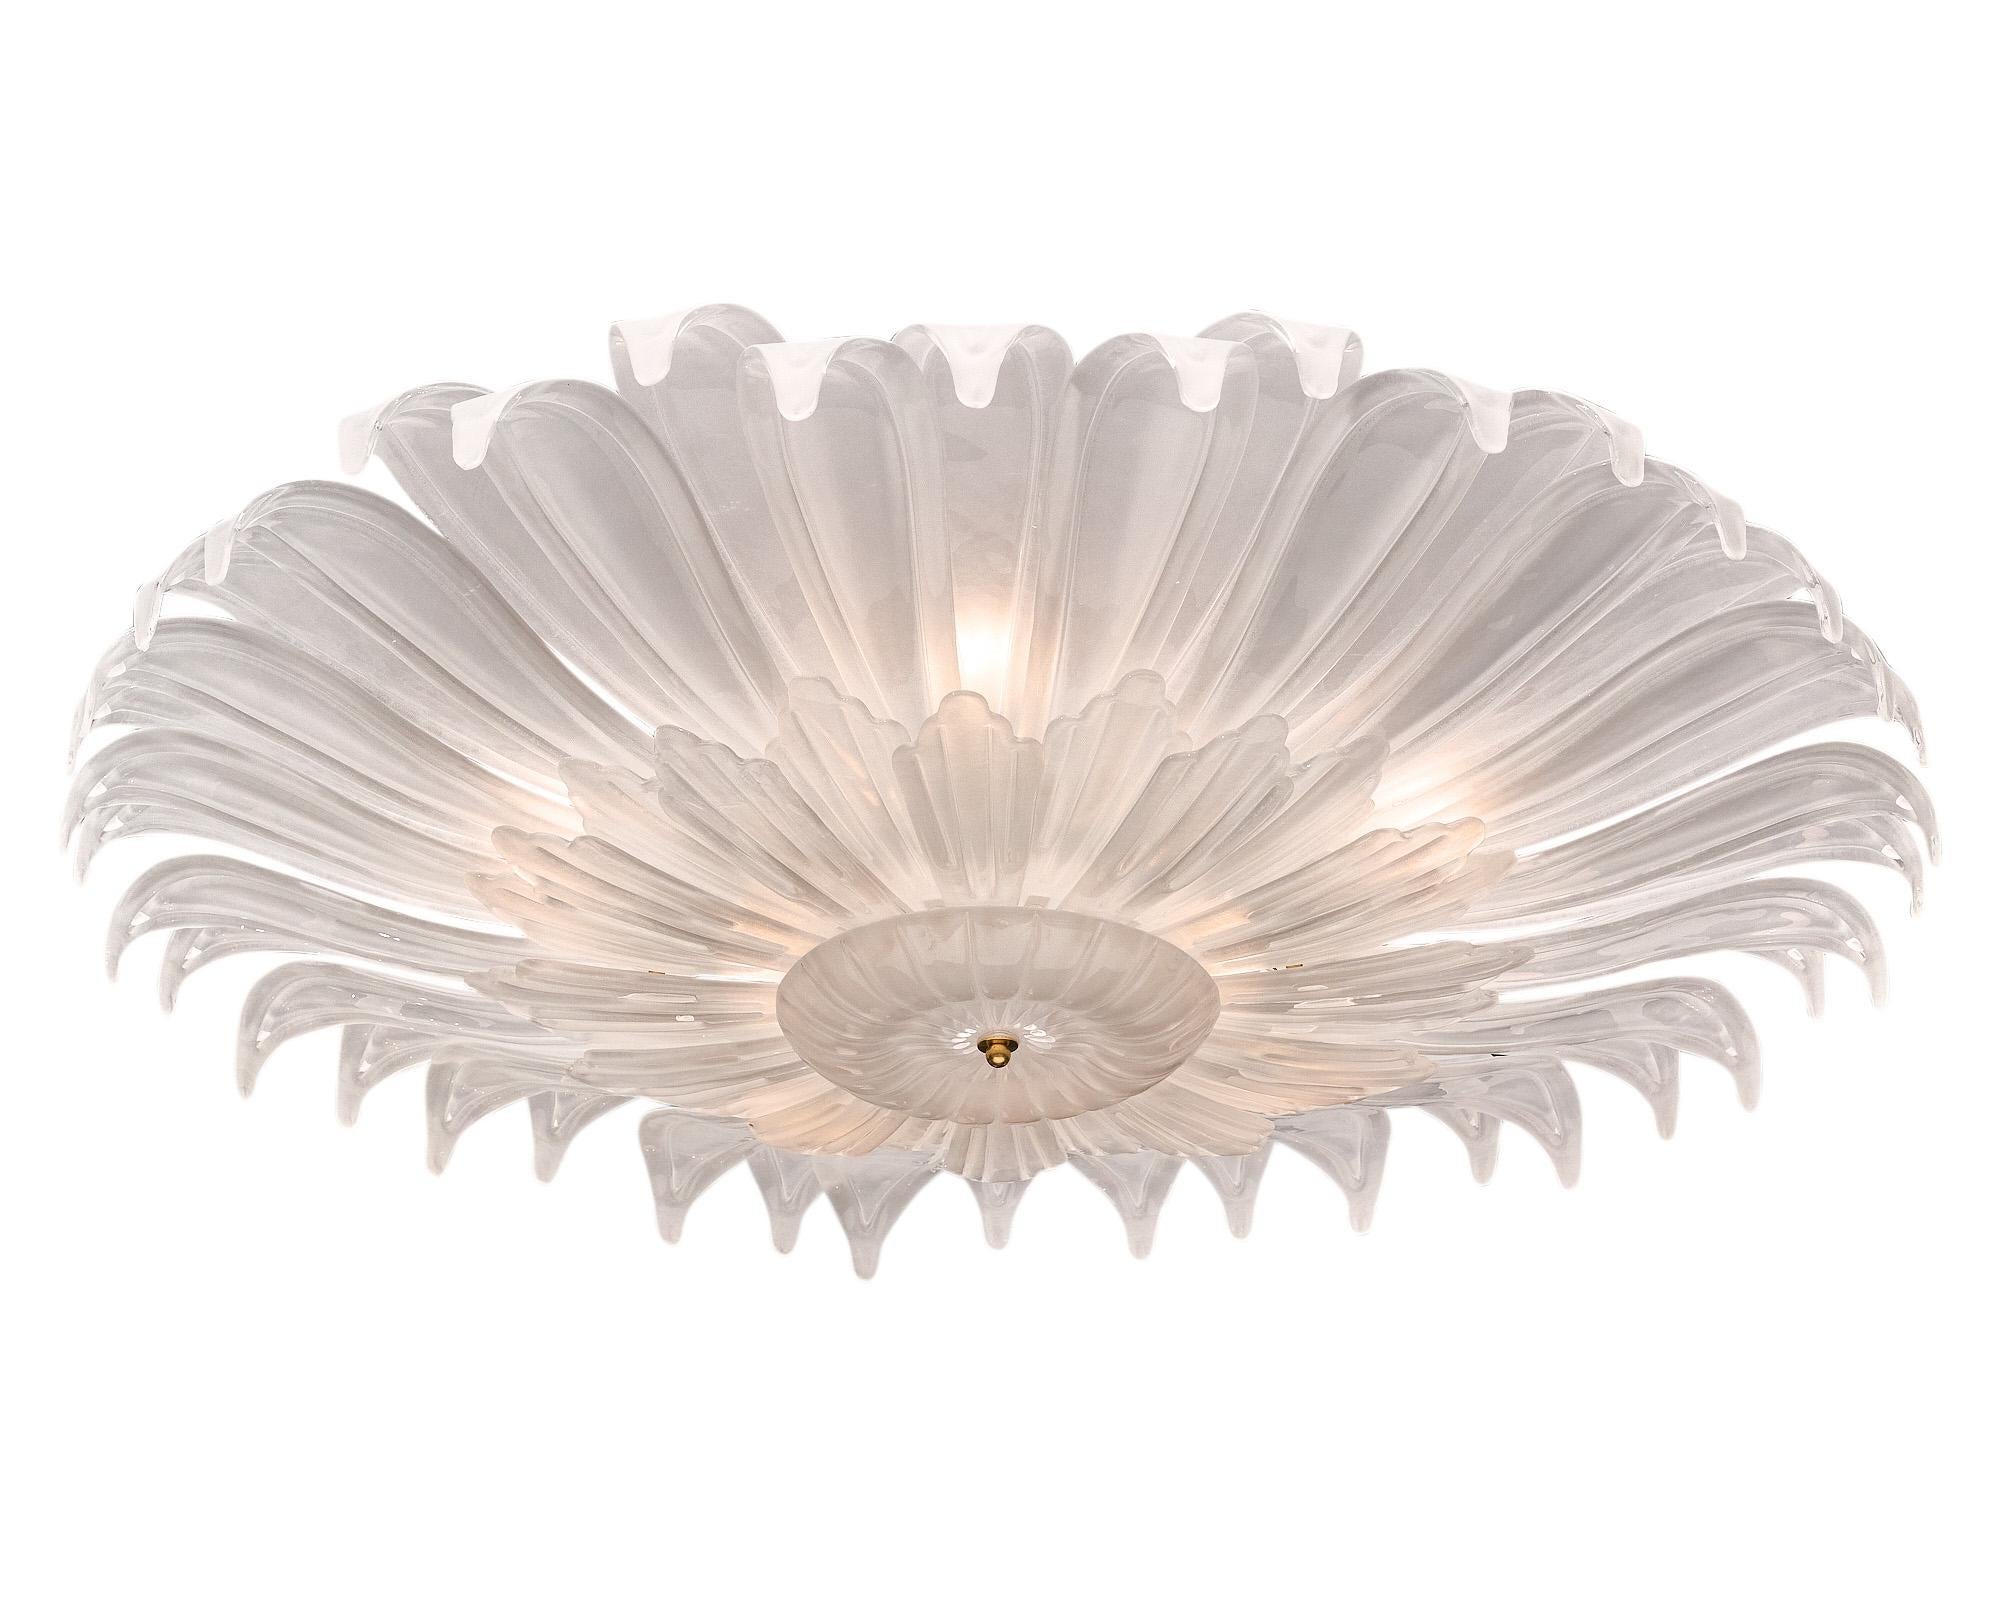 Large flush mount made of hand-blown glass petals from Murano, Italy. This flower shaped fixture has frosted glass that emanates from a central finial. It has been newly wired to fit US standards.